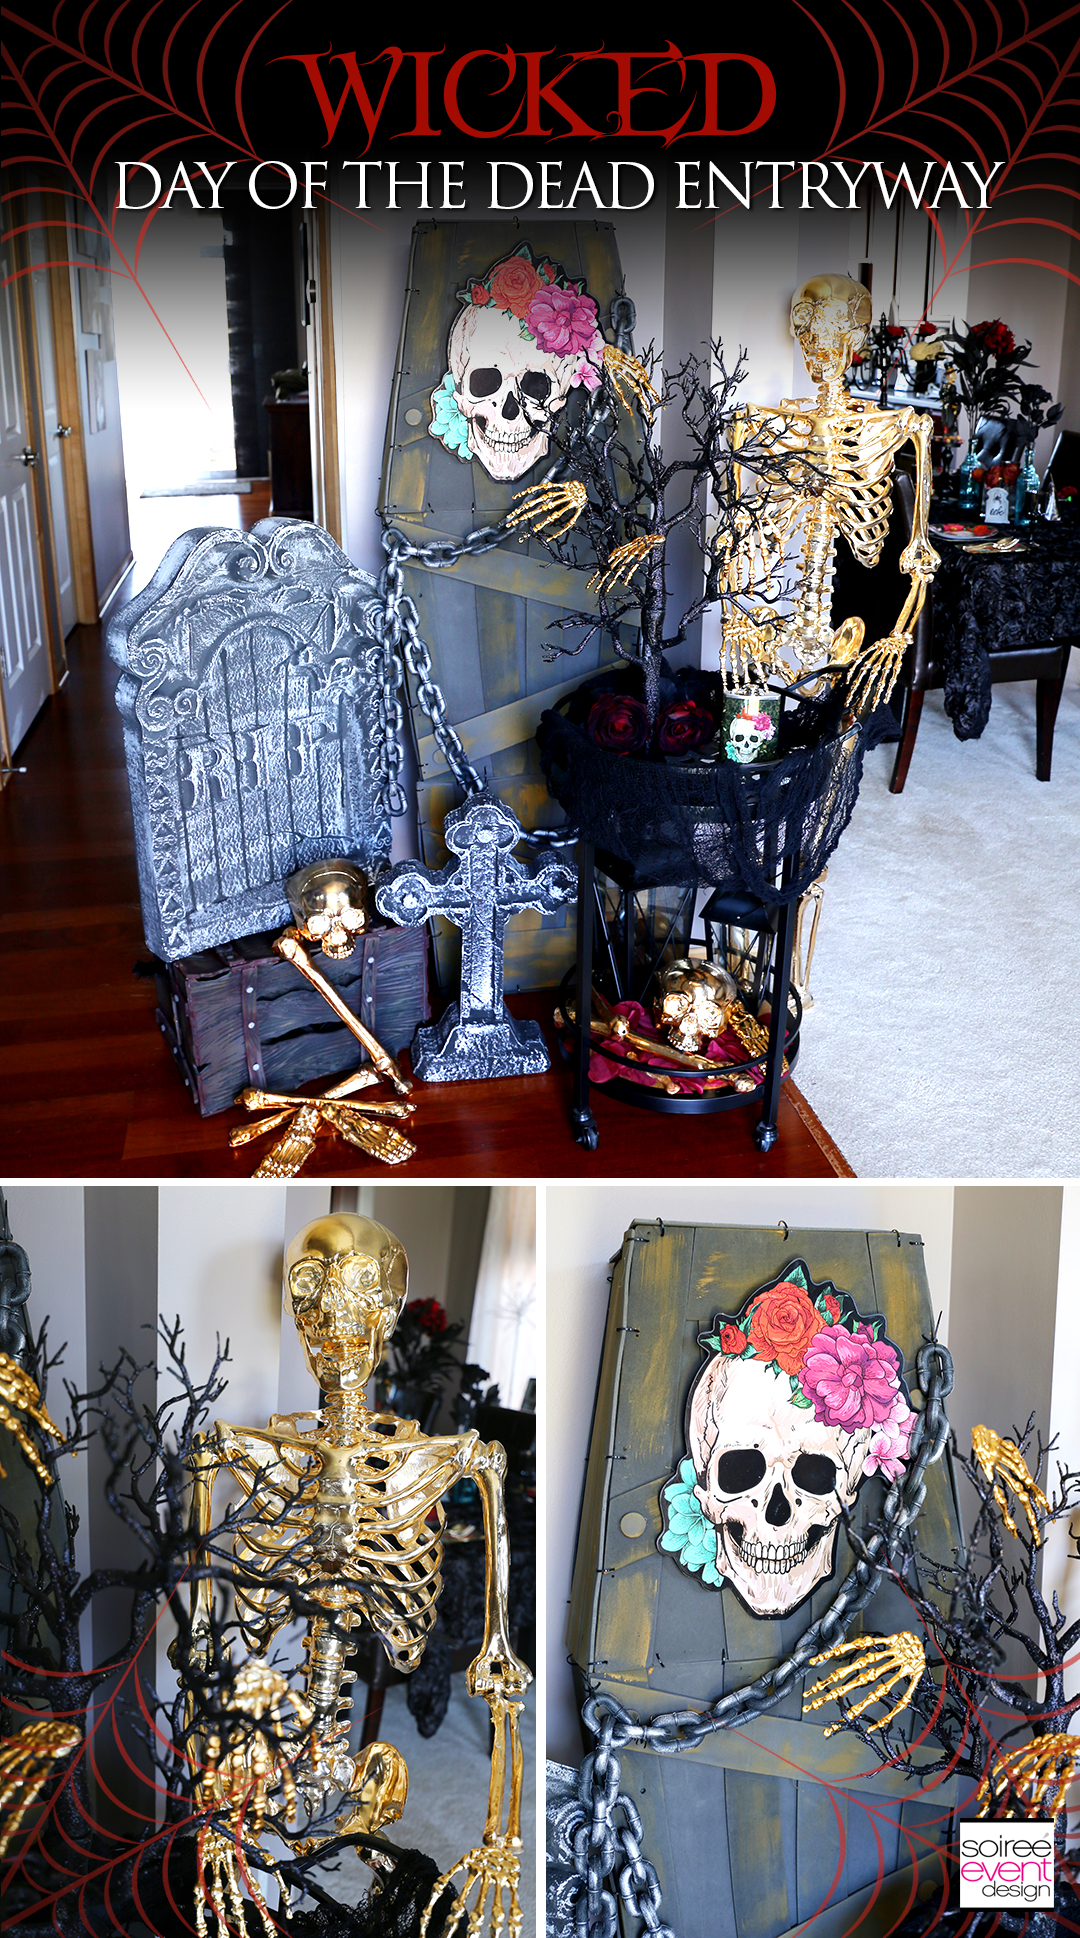 Day of the Dead Entryway - Soiree Event Design